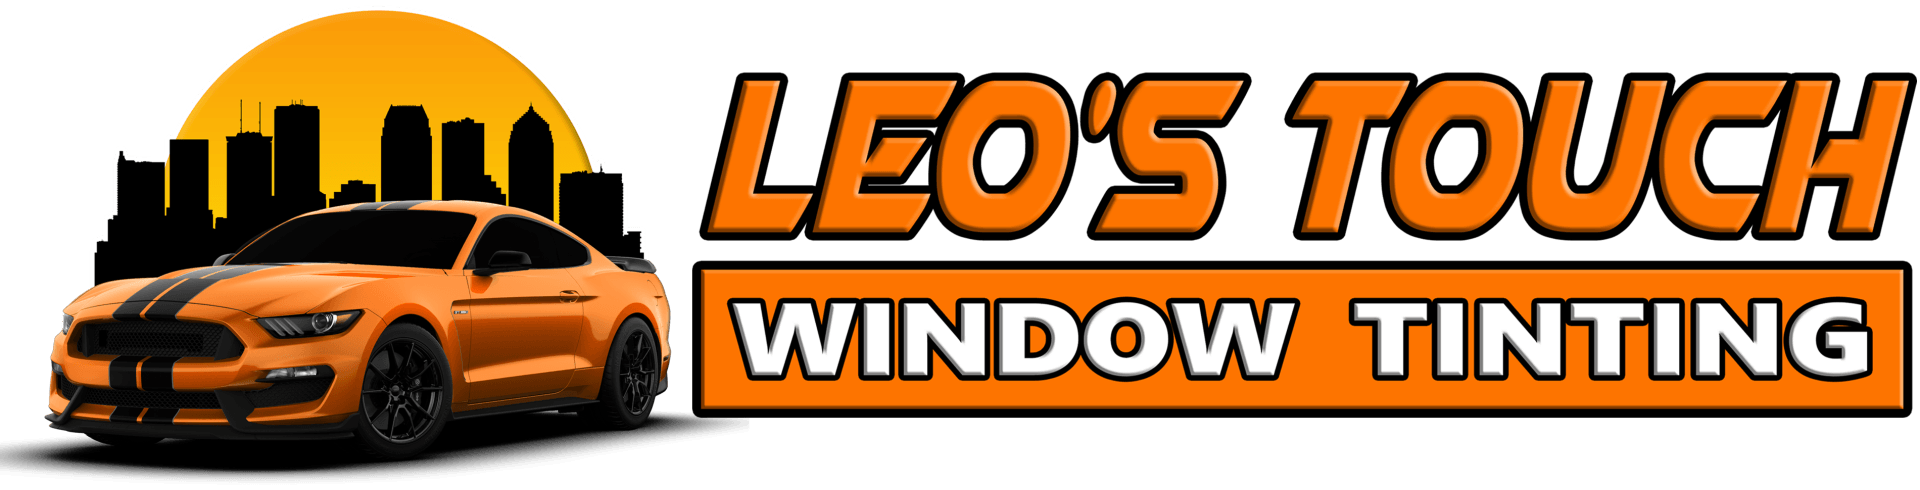 Leos Touch Window Tinting Tampa